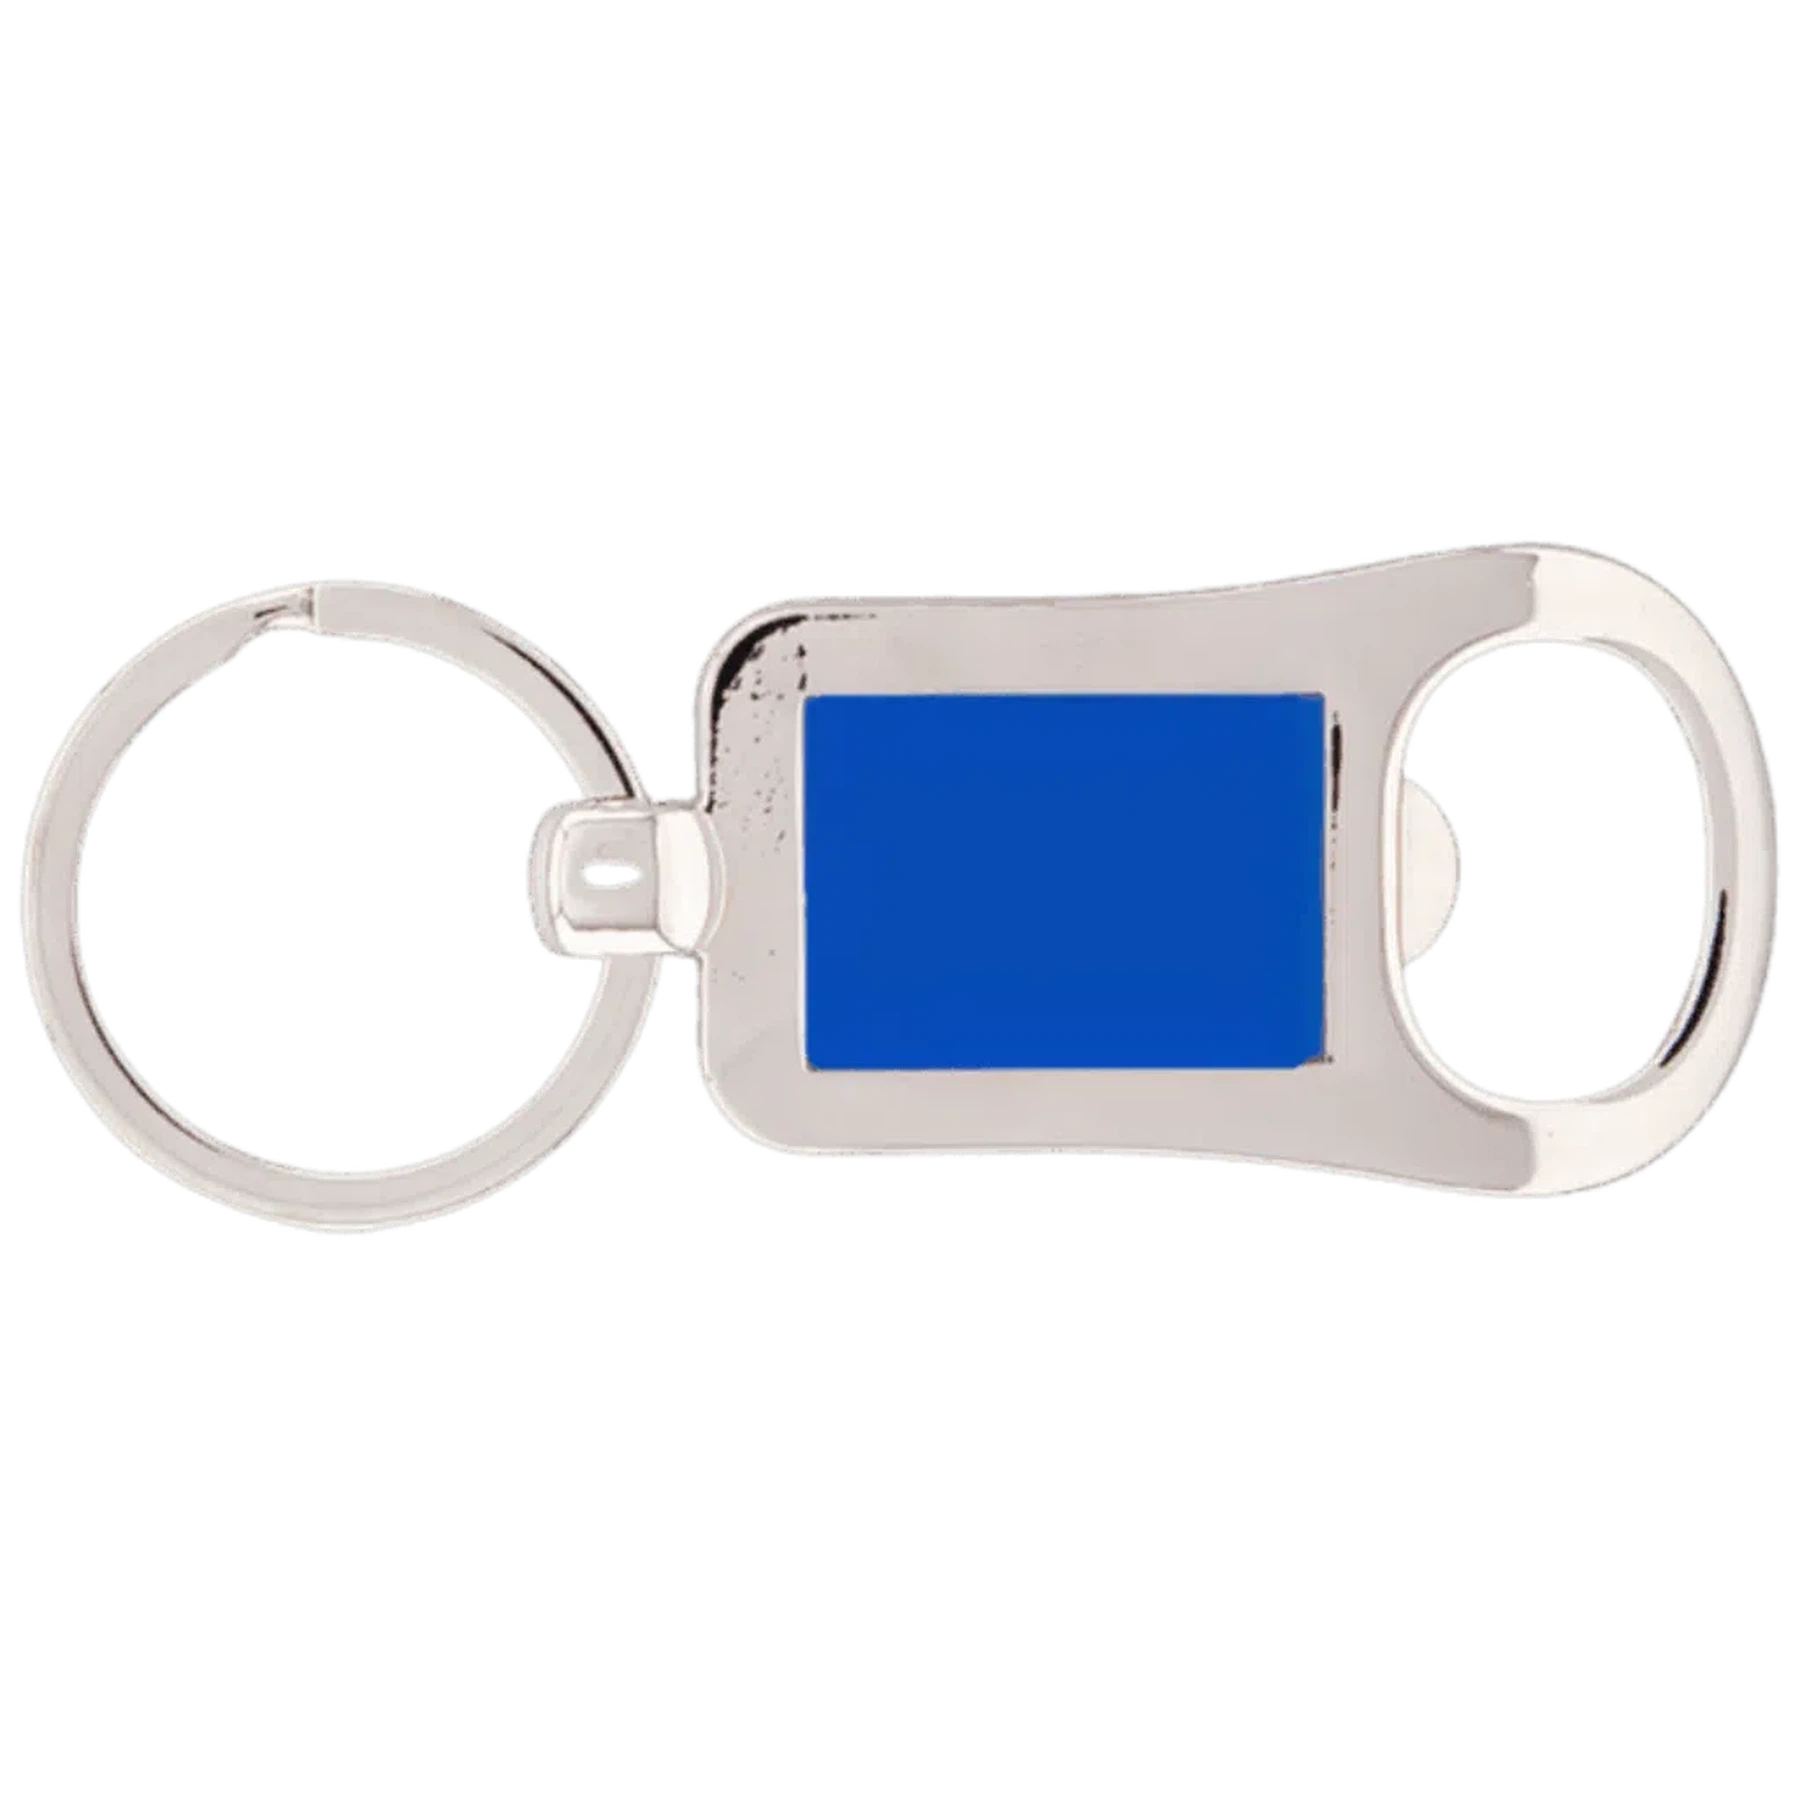 Personalized Metal Bottle Opener Keychains (Red, Black, Blue)